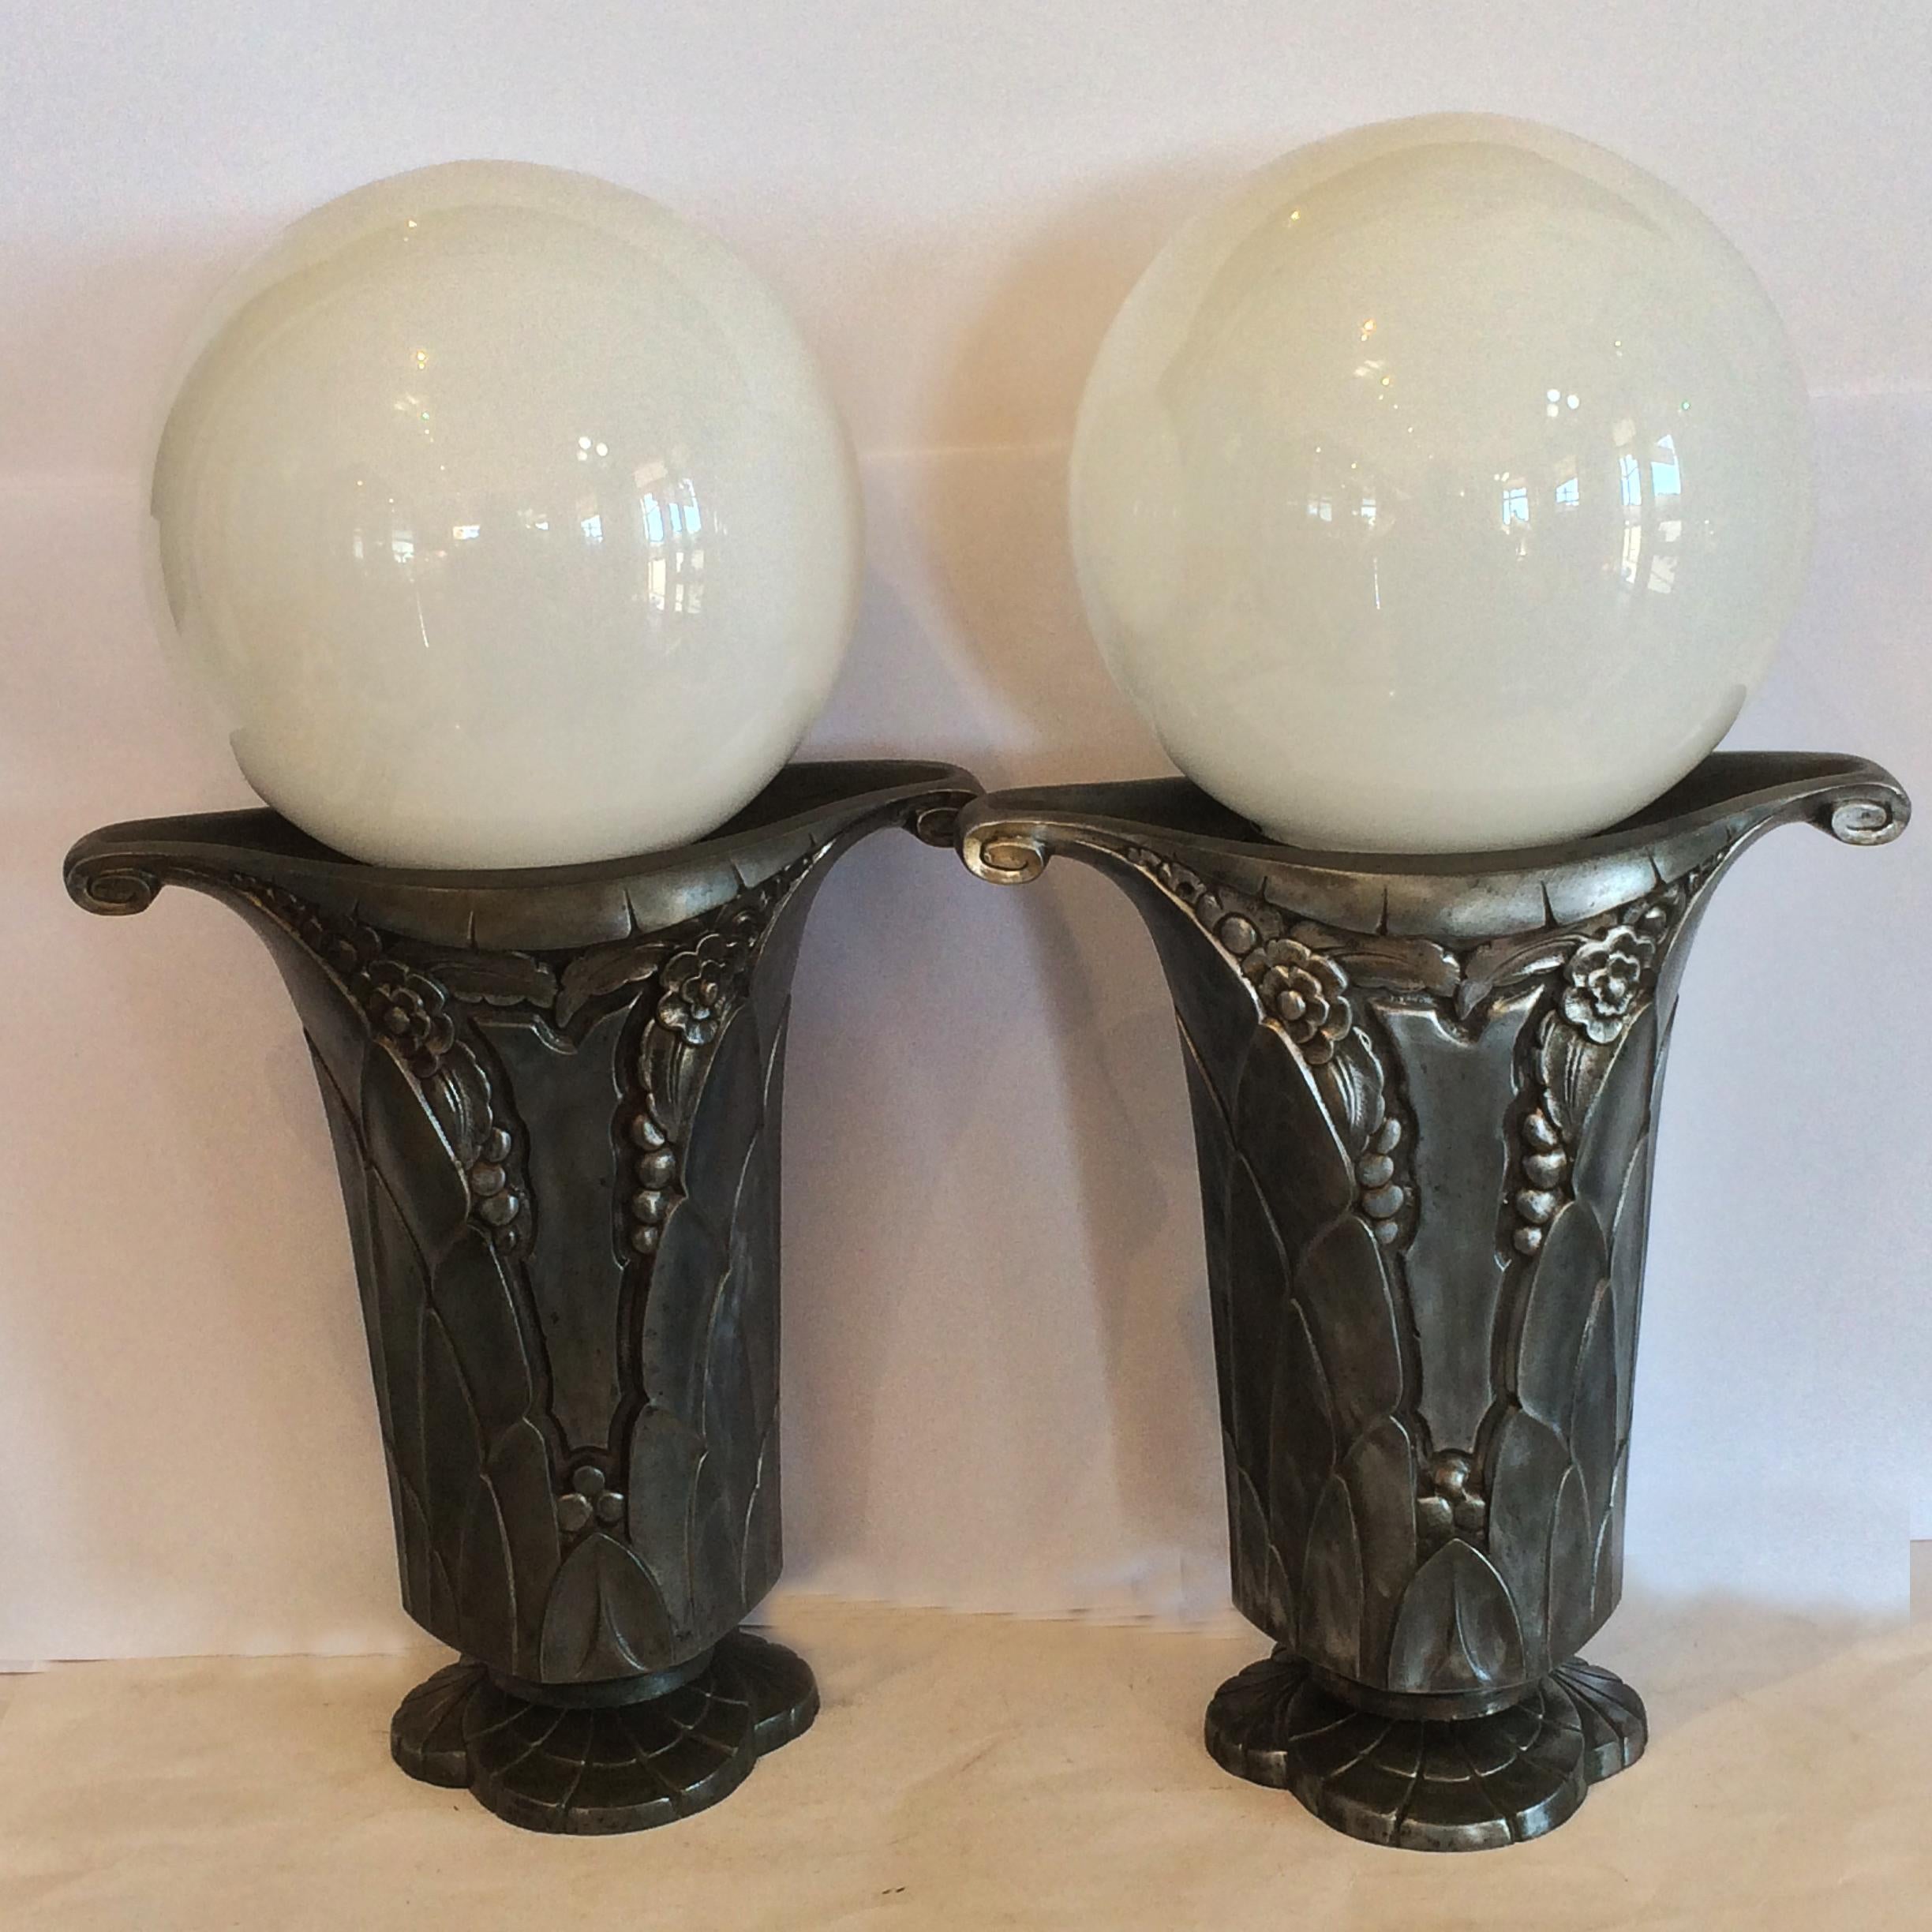 Art Deco pair of French nickel vase lamps with white spheres of light, France. circa 1930. French “Fruit, Flowers, Leaves” influence, to the deep surface design, with undercut throats at base of lamps, cord entering at rear above base, and very fine